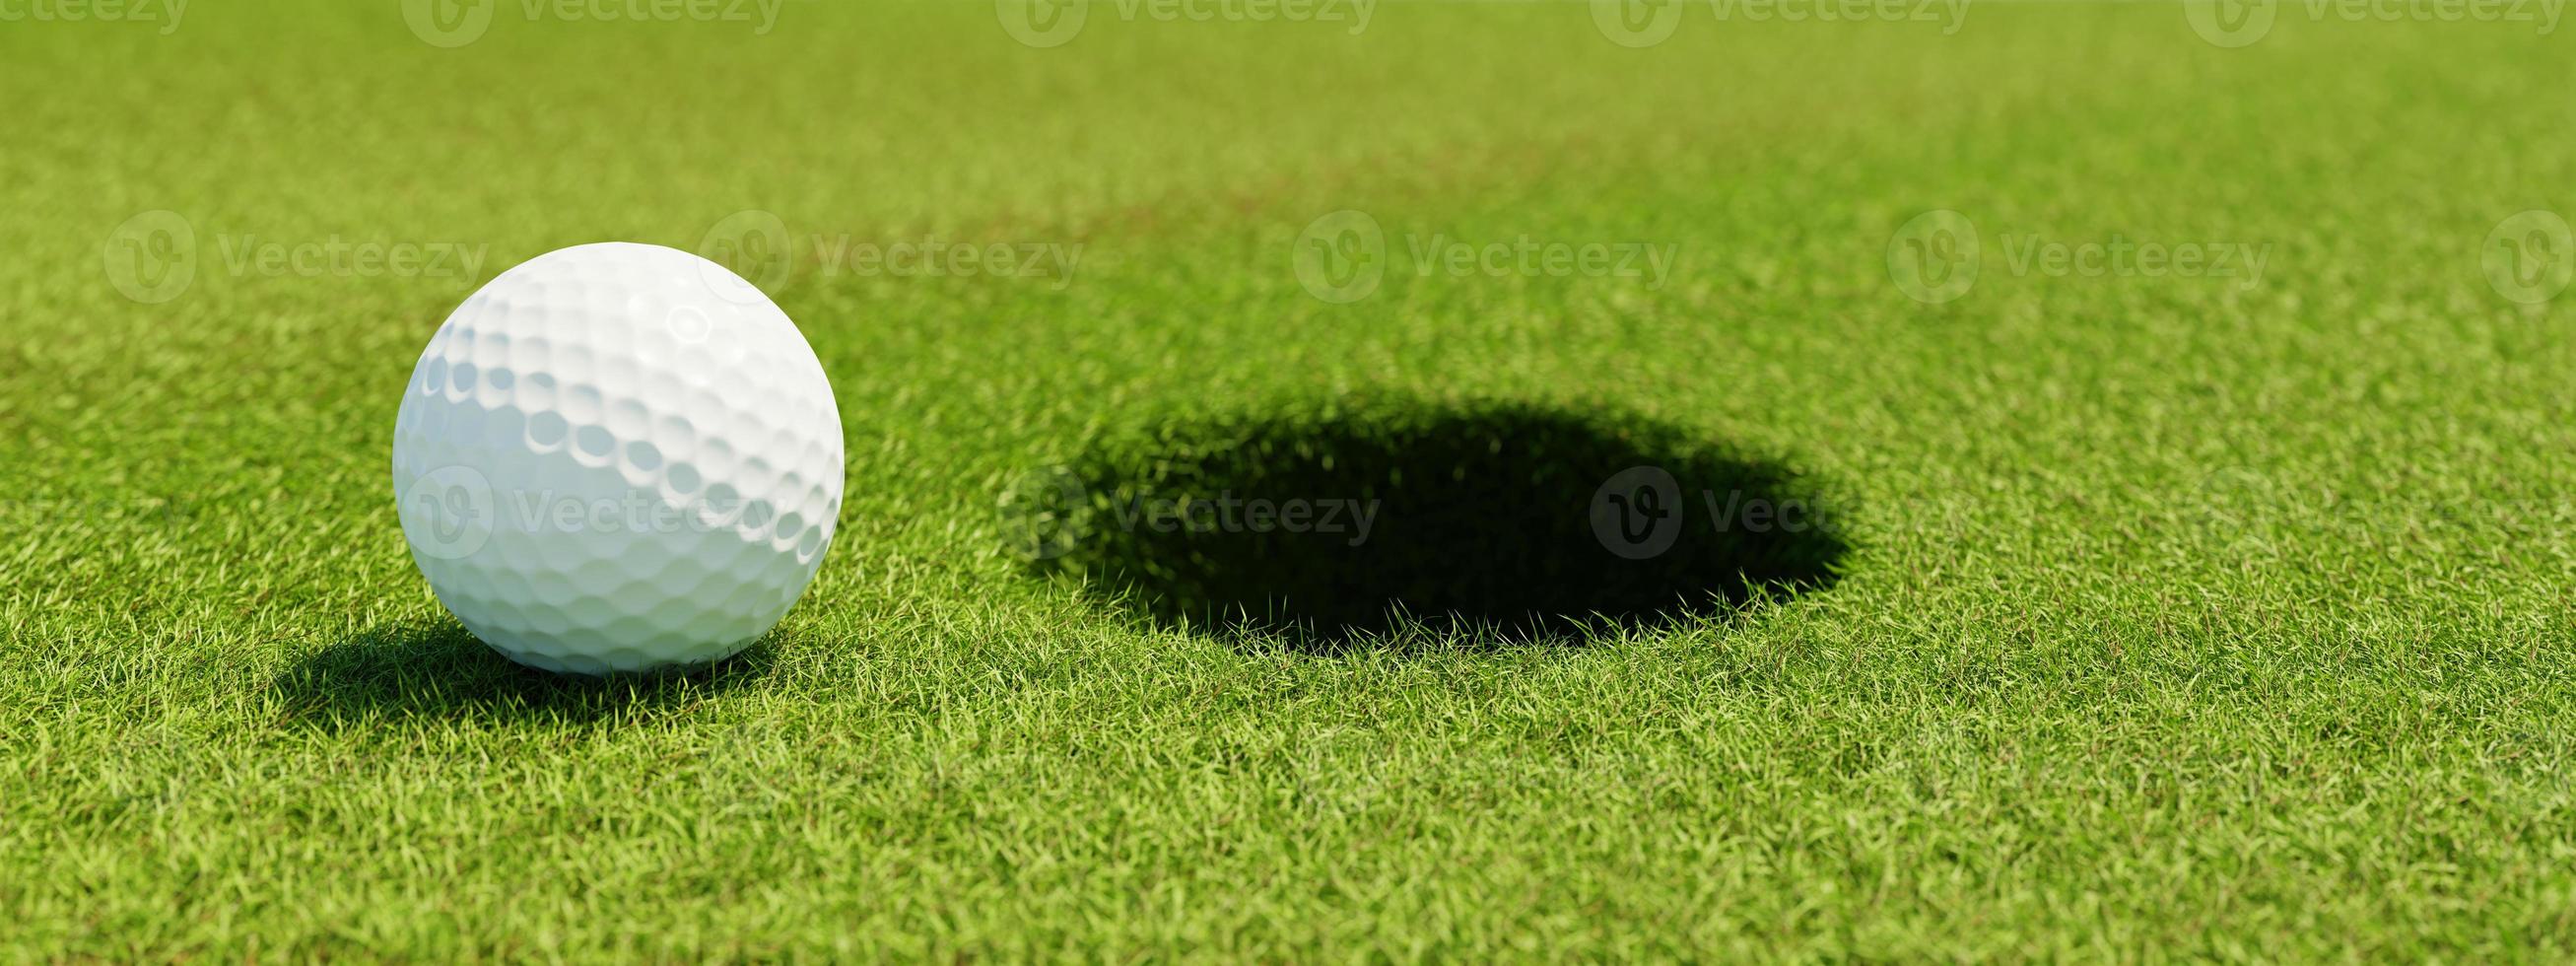 Golf ball on grass in fairway with hole on green background. Sport and athletic concept. 3D illustration rendering photo